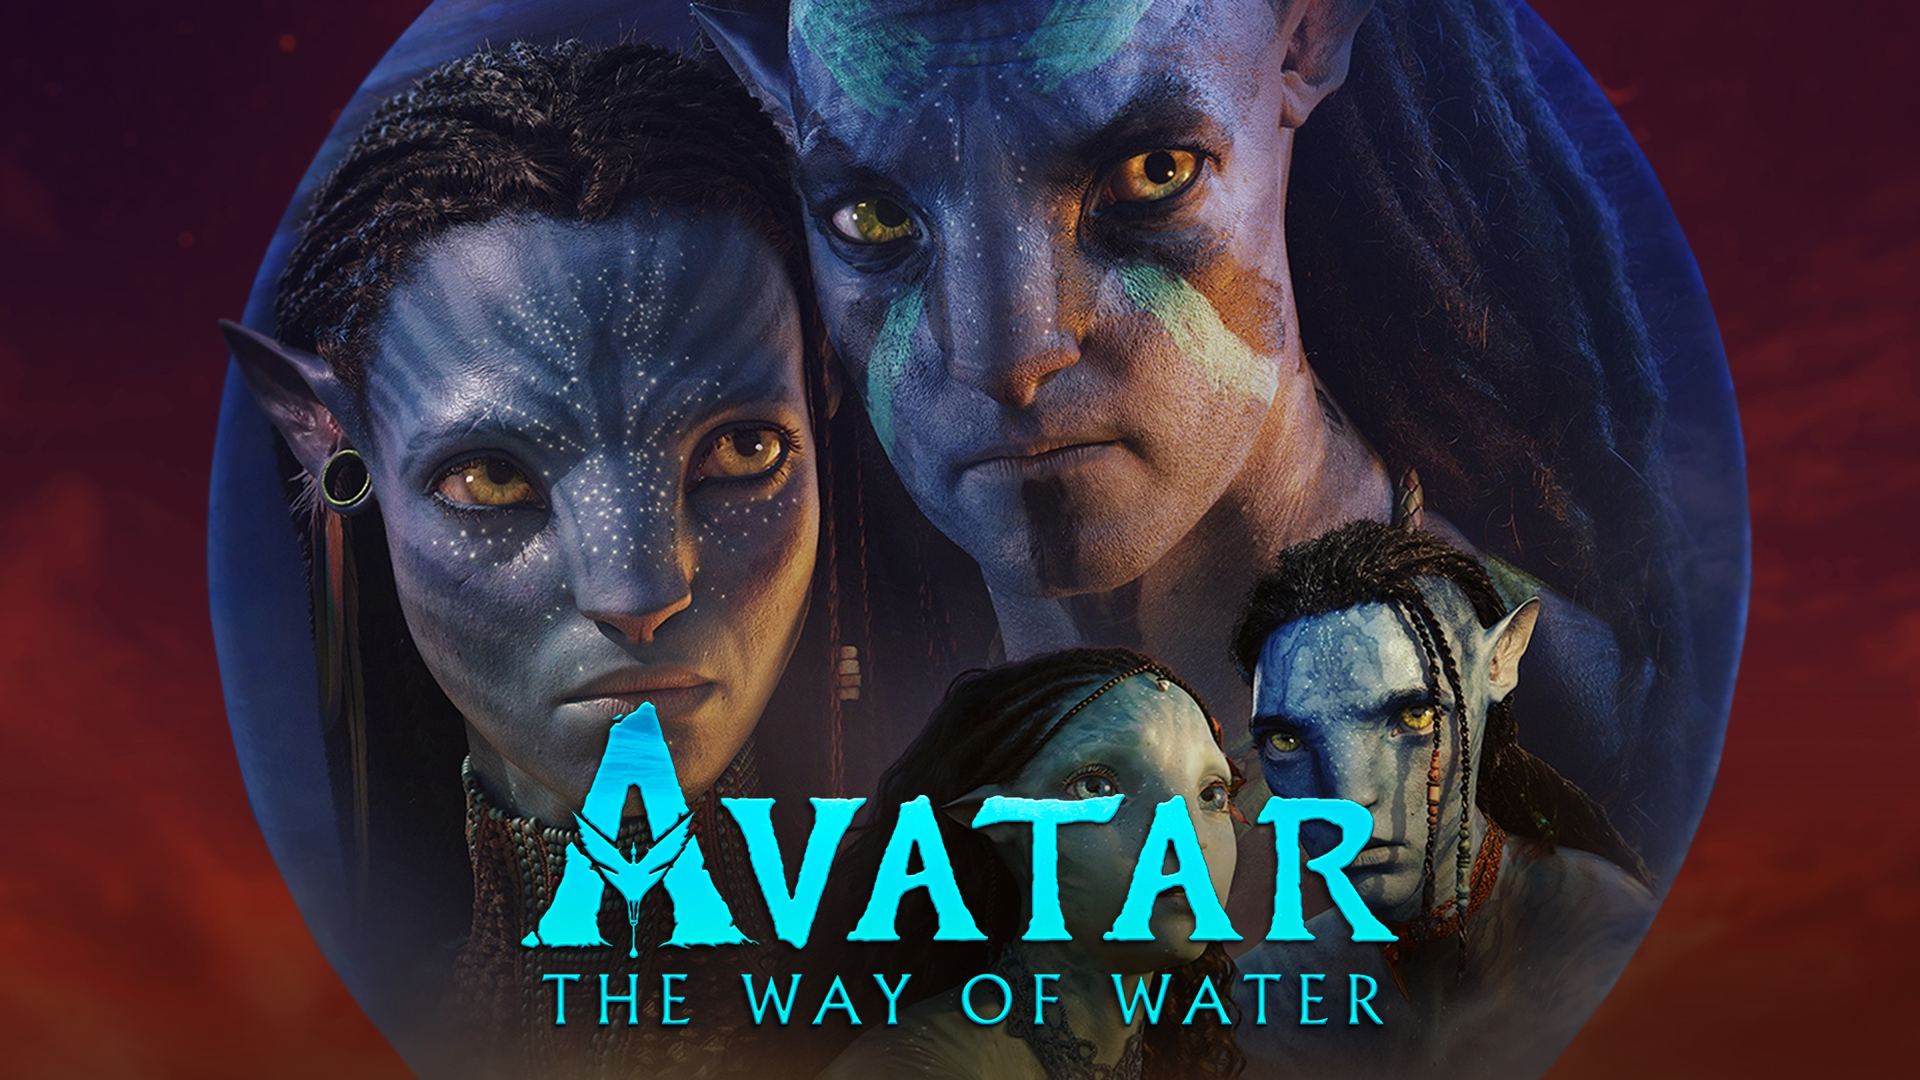 James Cameron returns to Pandora for the second Avatar movie, which feels like an amalgamation of all his previous movies in both good and bad ways.